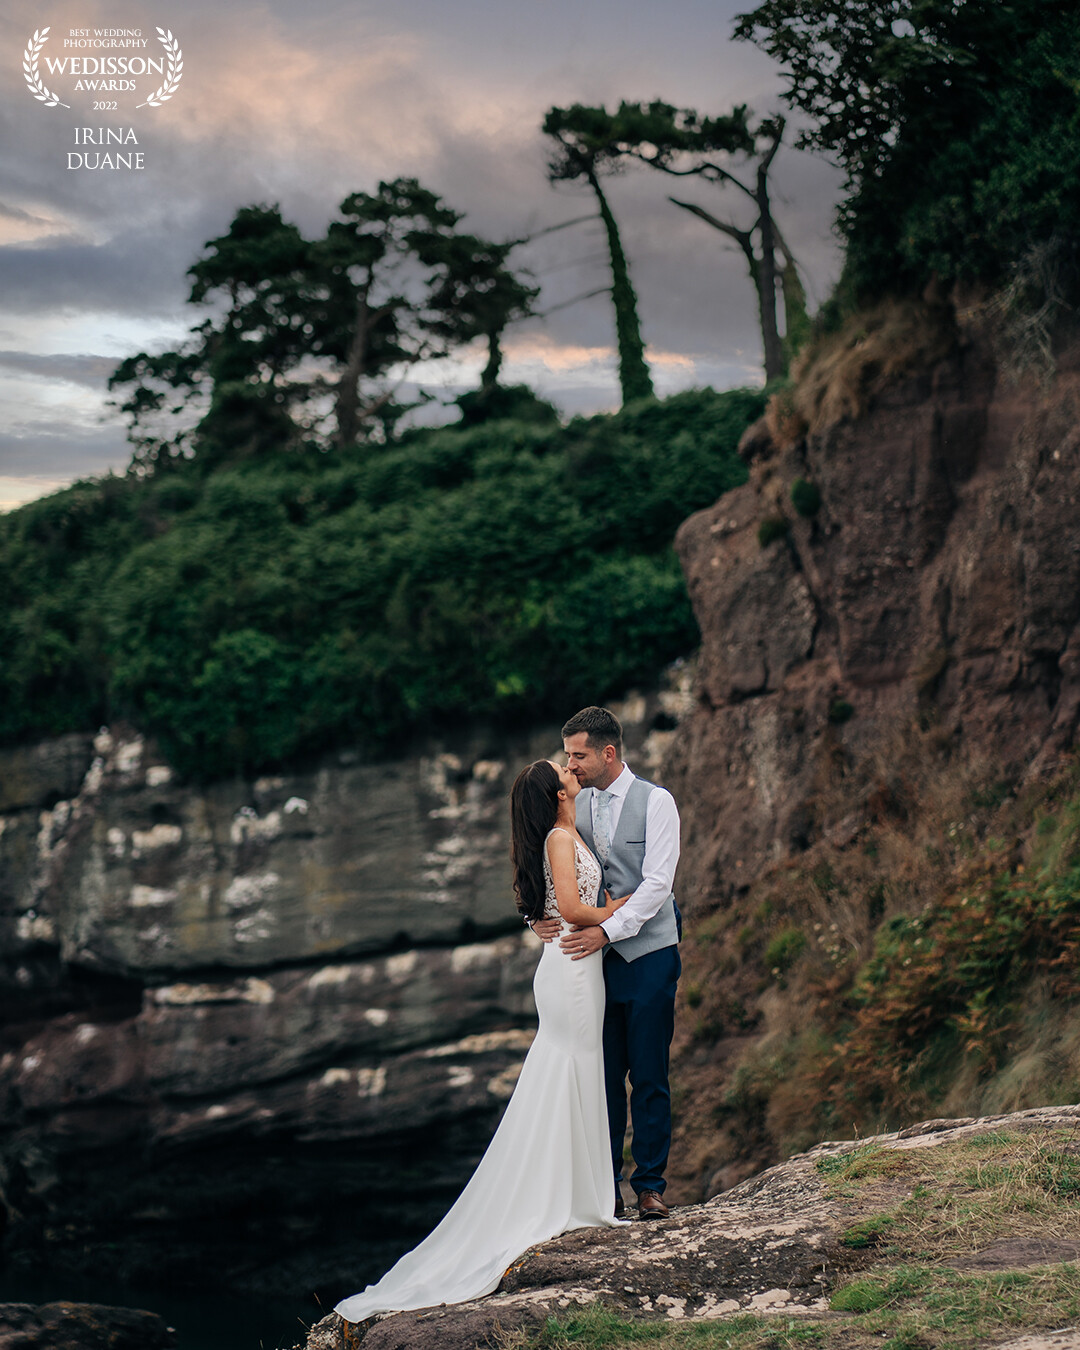 Aisling and Colin enjoying a quiet moment together on the beautiful grounds near The Haven Hotel Dunmore East, Ireland.  <br />
 Stunning couple in a beautiful setting!